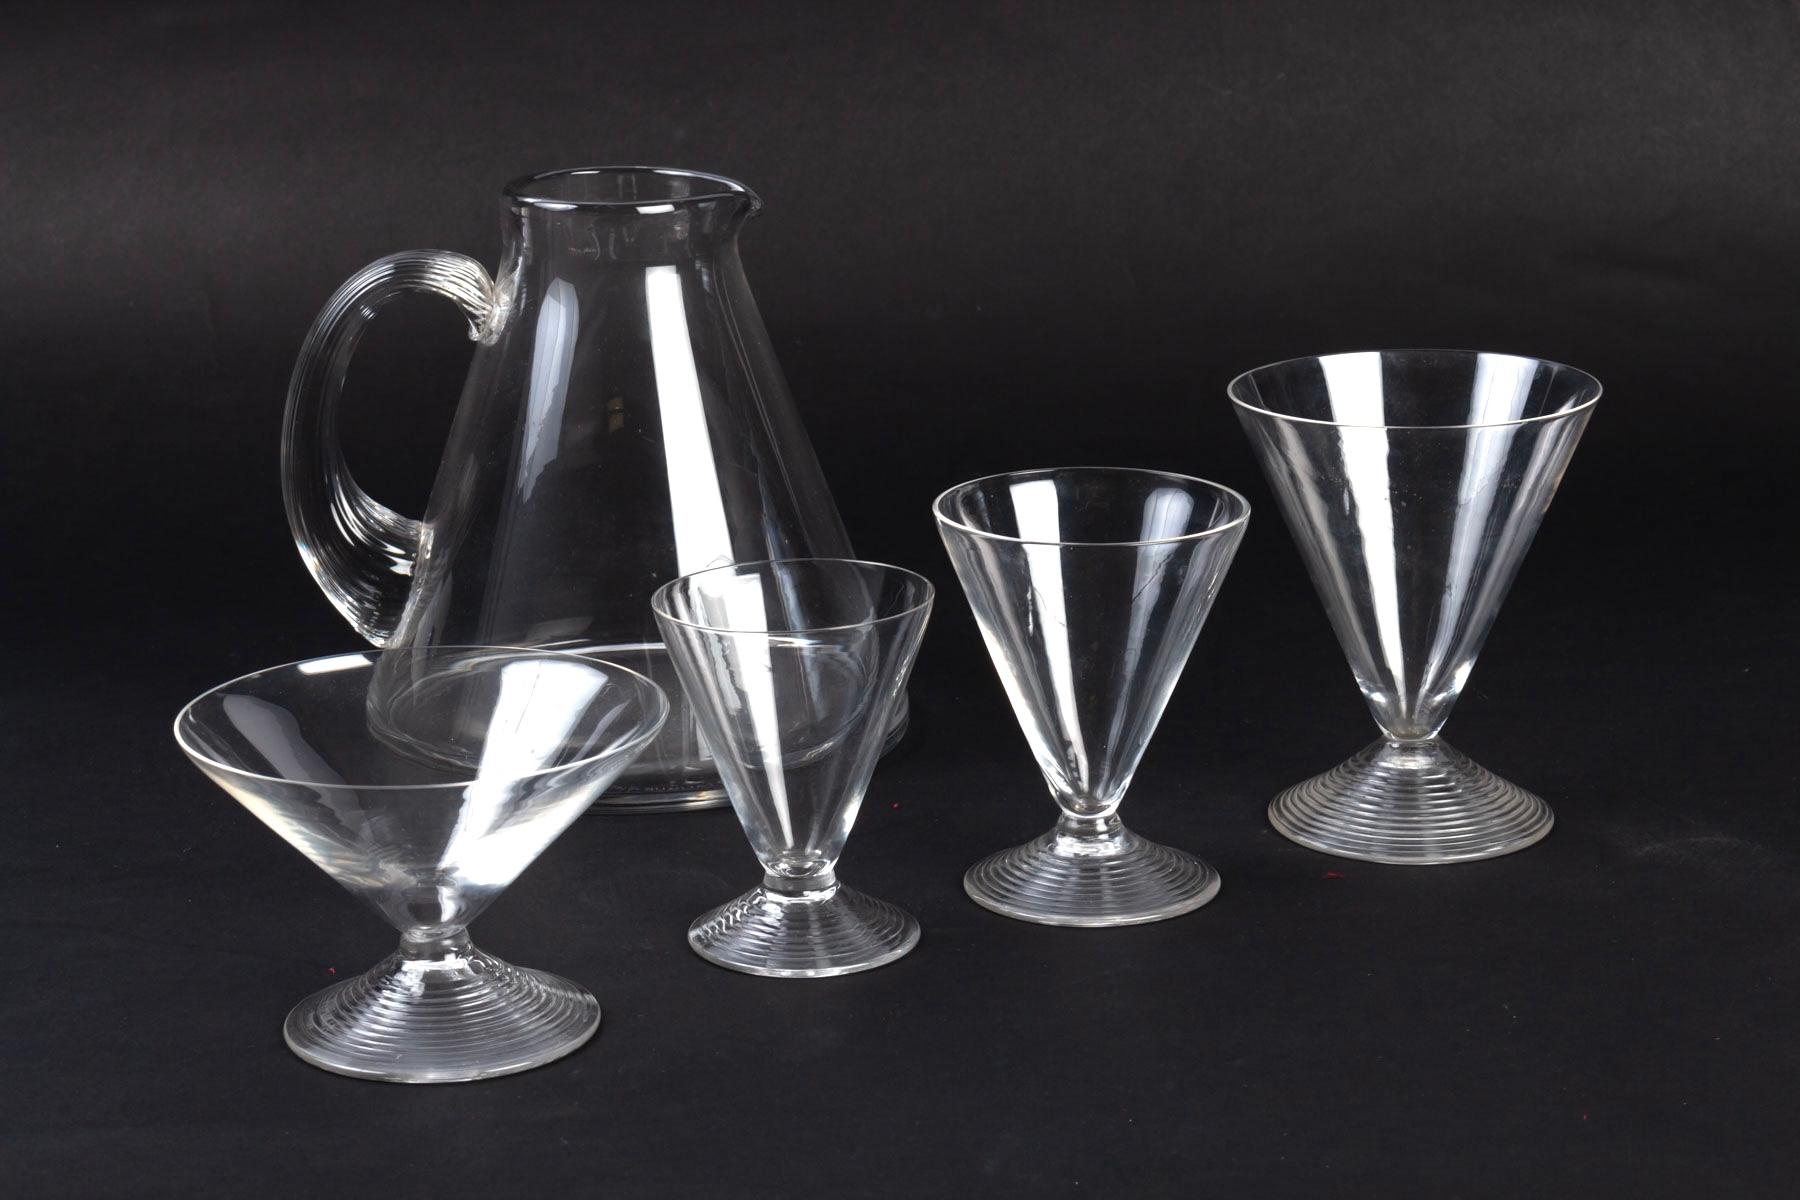 Set of 49 pieces: 48 drinking glasses, 1 pitcher made by René Lalique in 1937. Model is named 